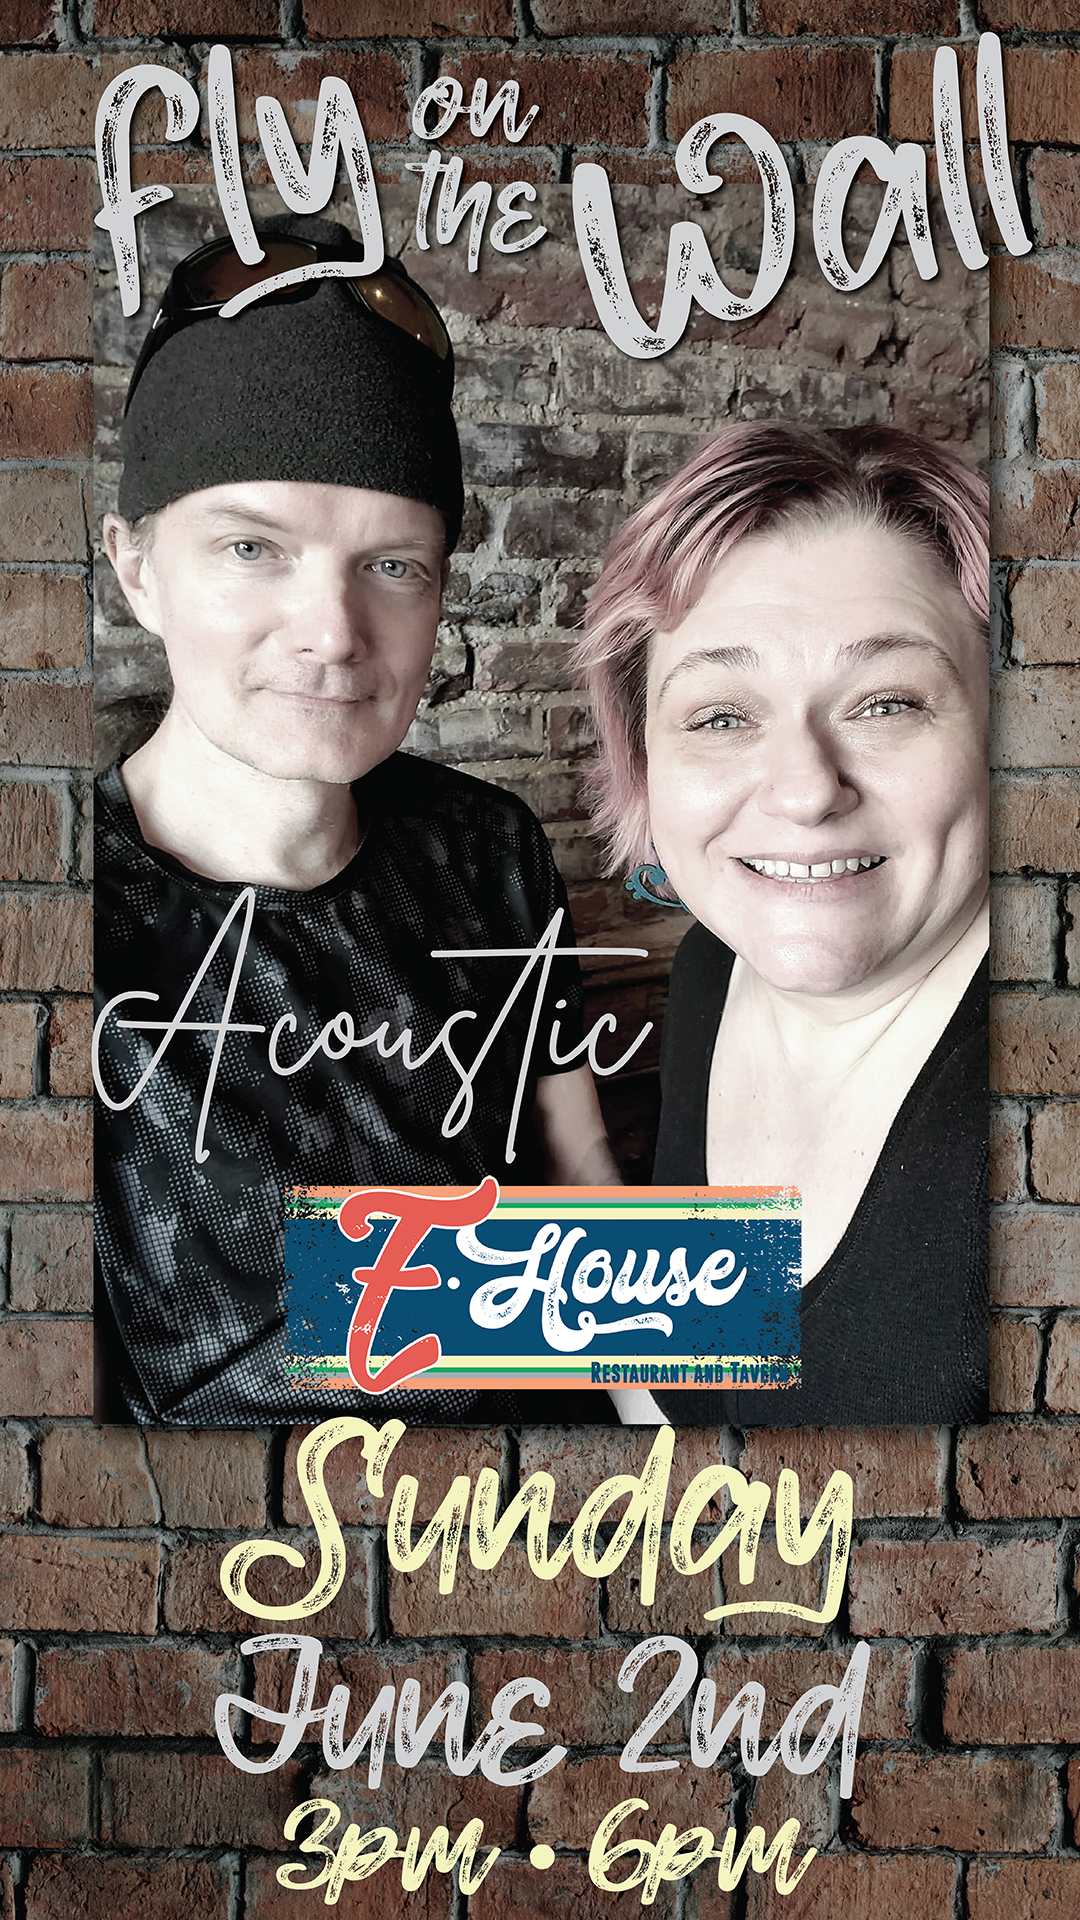 Flyer for "Fly on the Wall Acoustic" performance at E-House Restaurant and Tavern on Sunday, June 2nd, from 3 PM to 6 PM. Features a man and woman against a brick background.